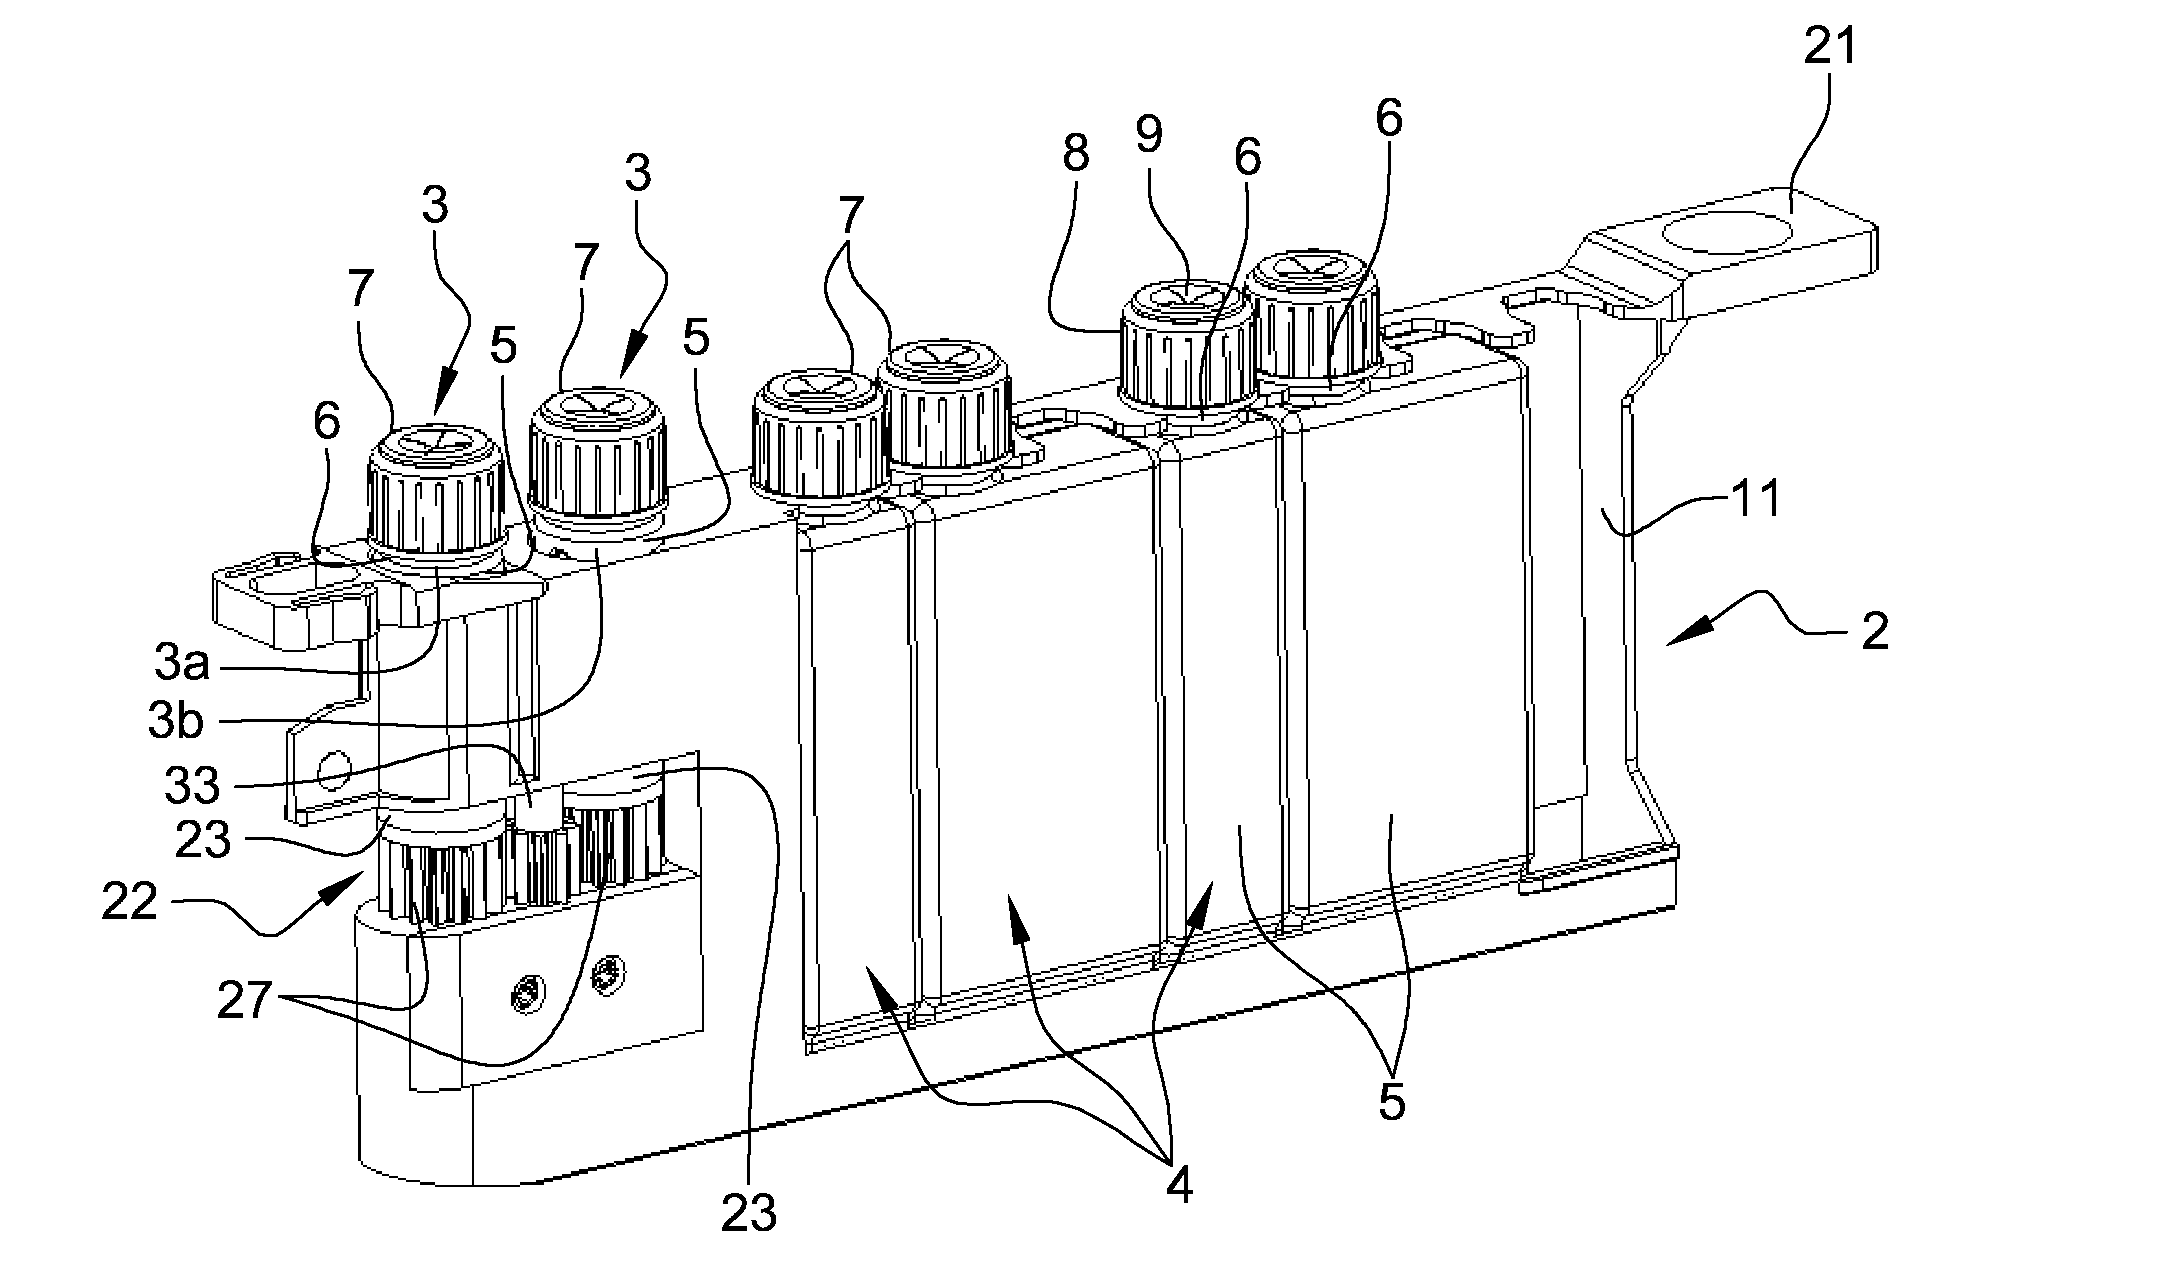 Analysis unit for analysis device